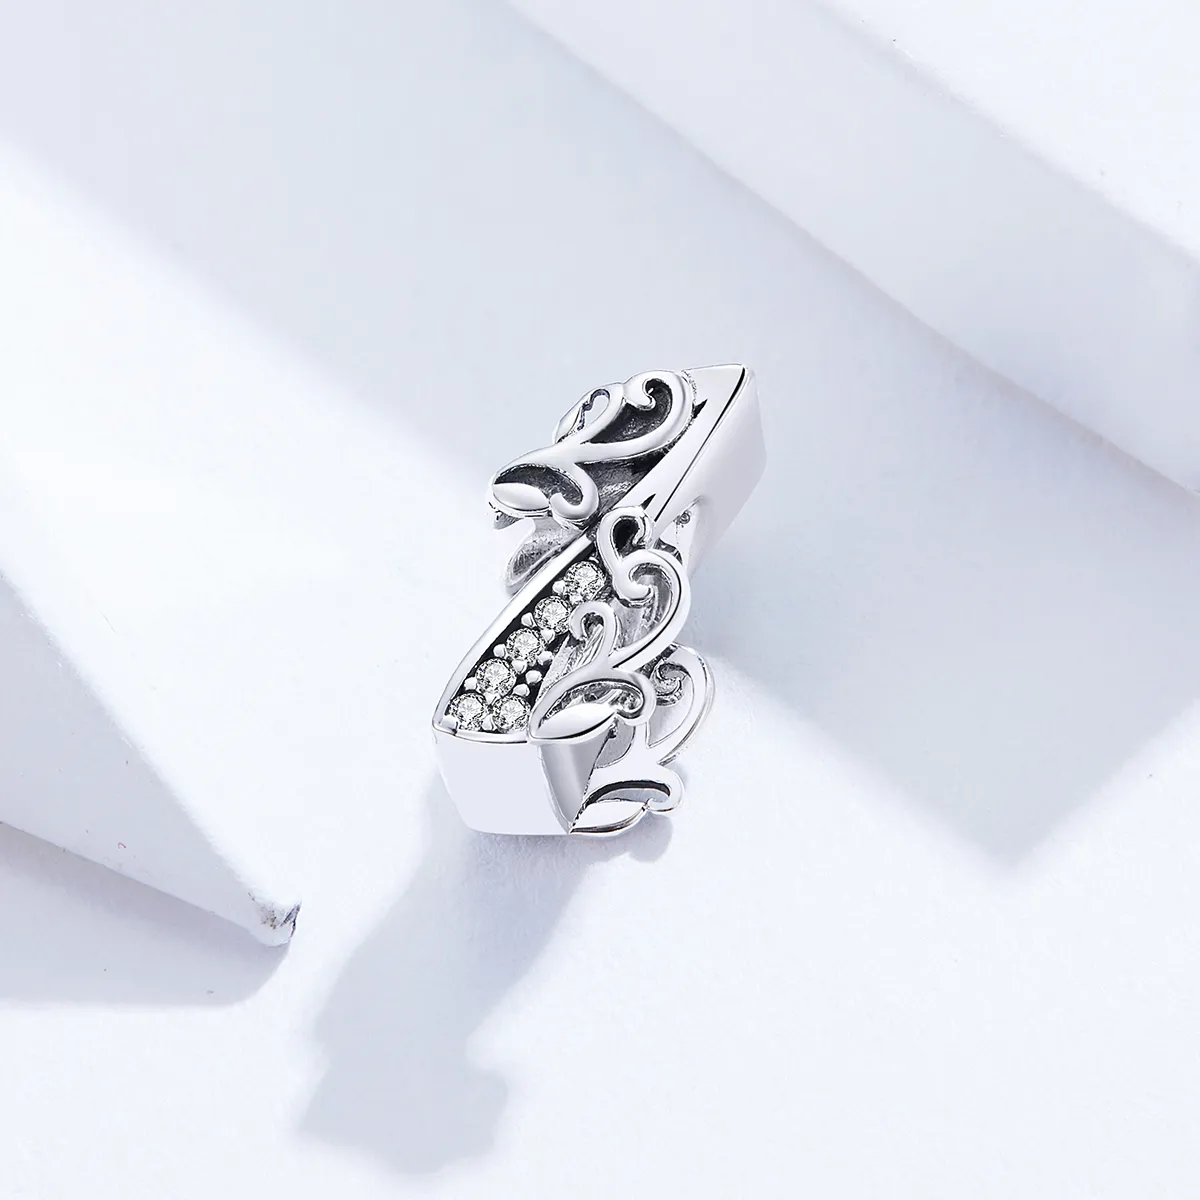 Pandora Style Silver Number 1 Charm - SCC1418-1